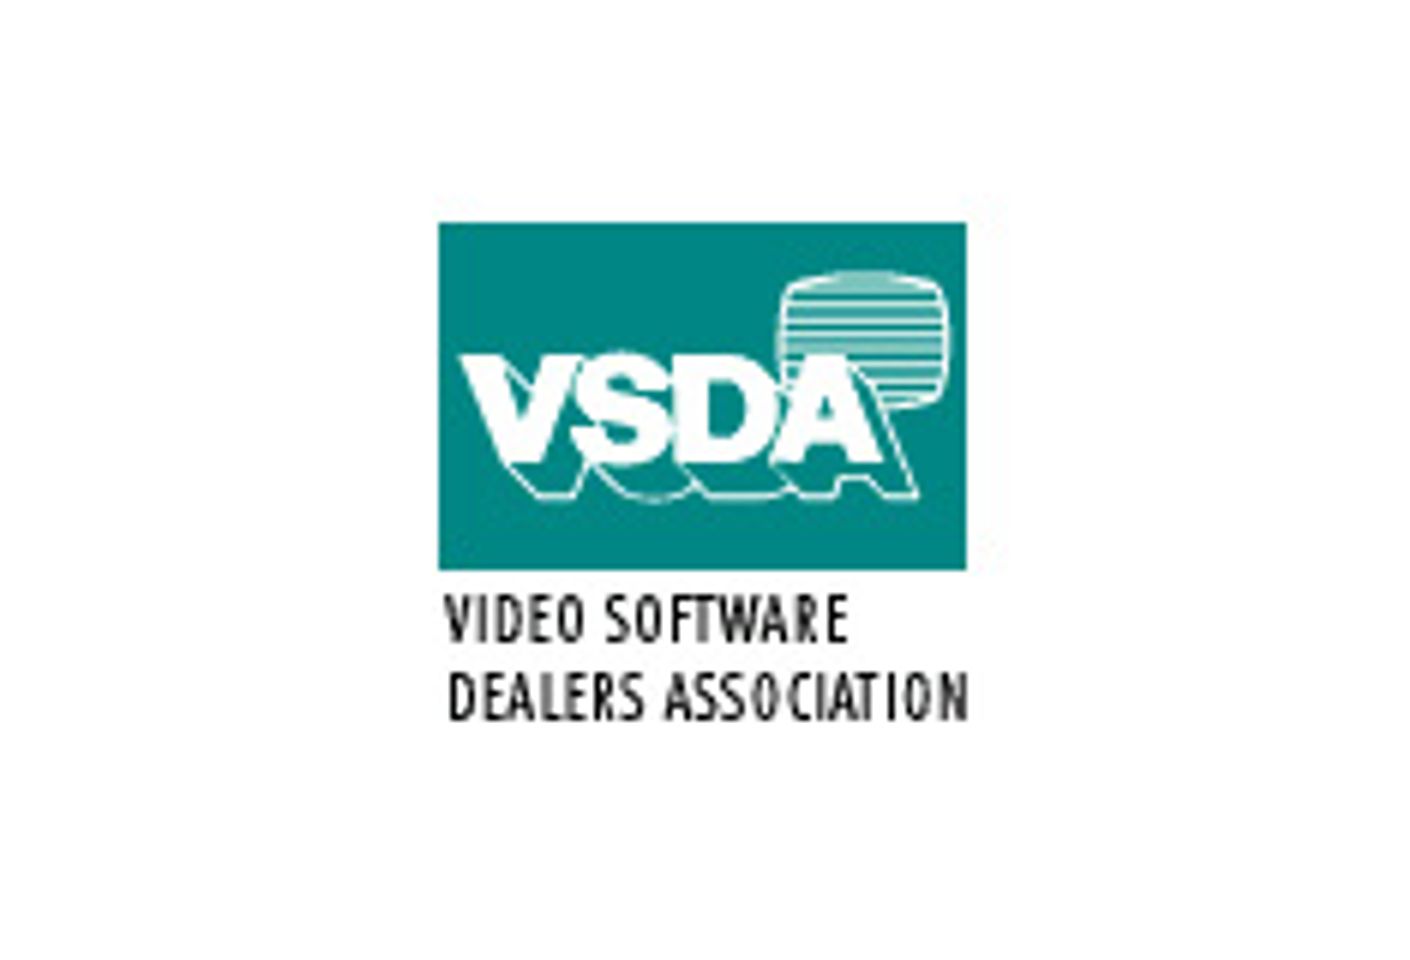 VSDA Hails Signing of Family Entertainment and Copyright Act